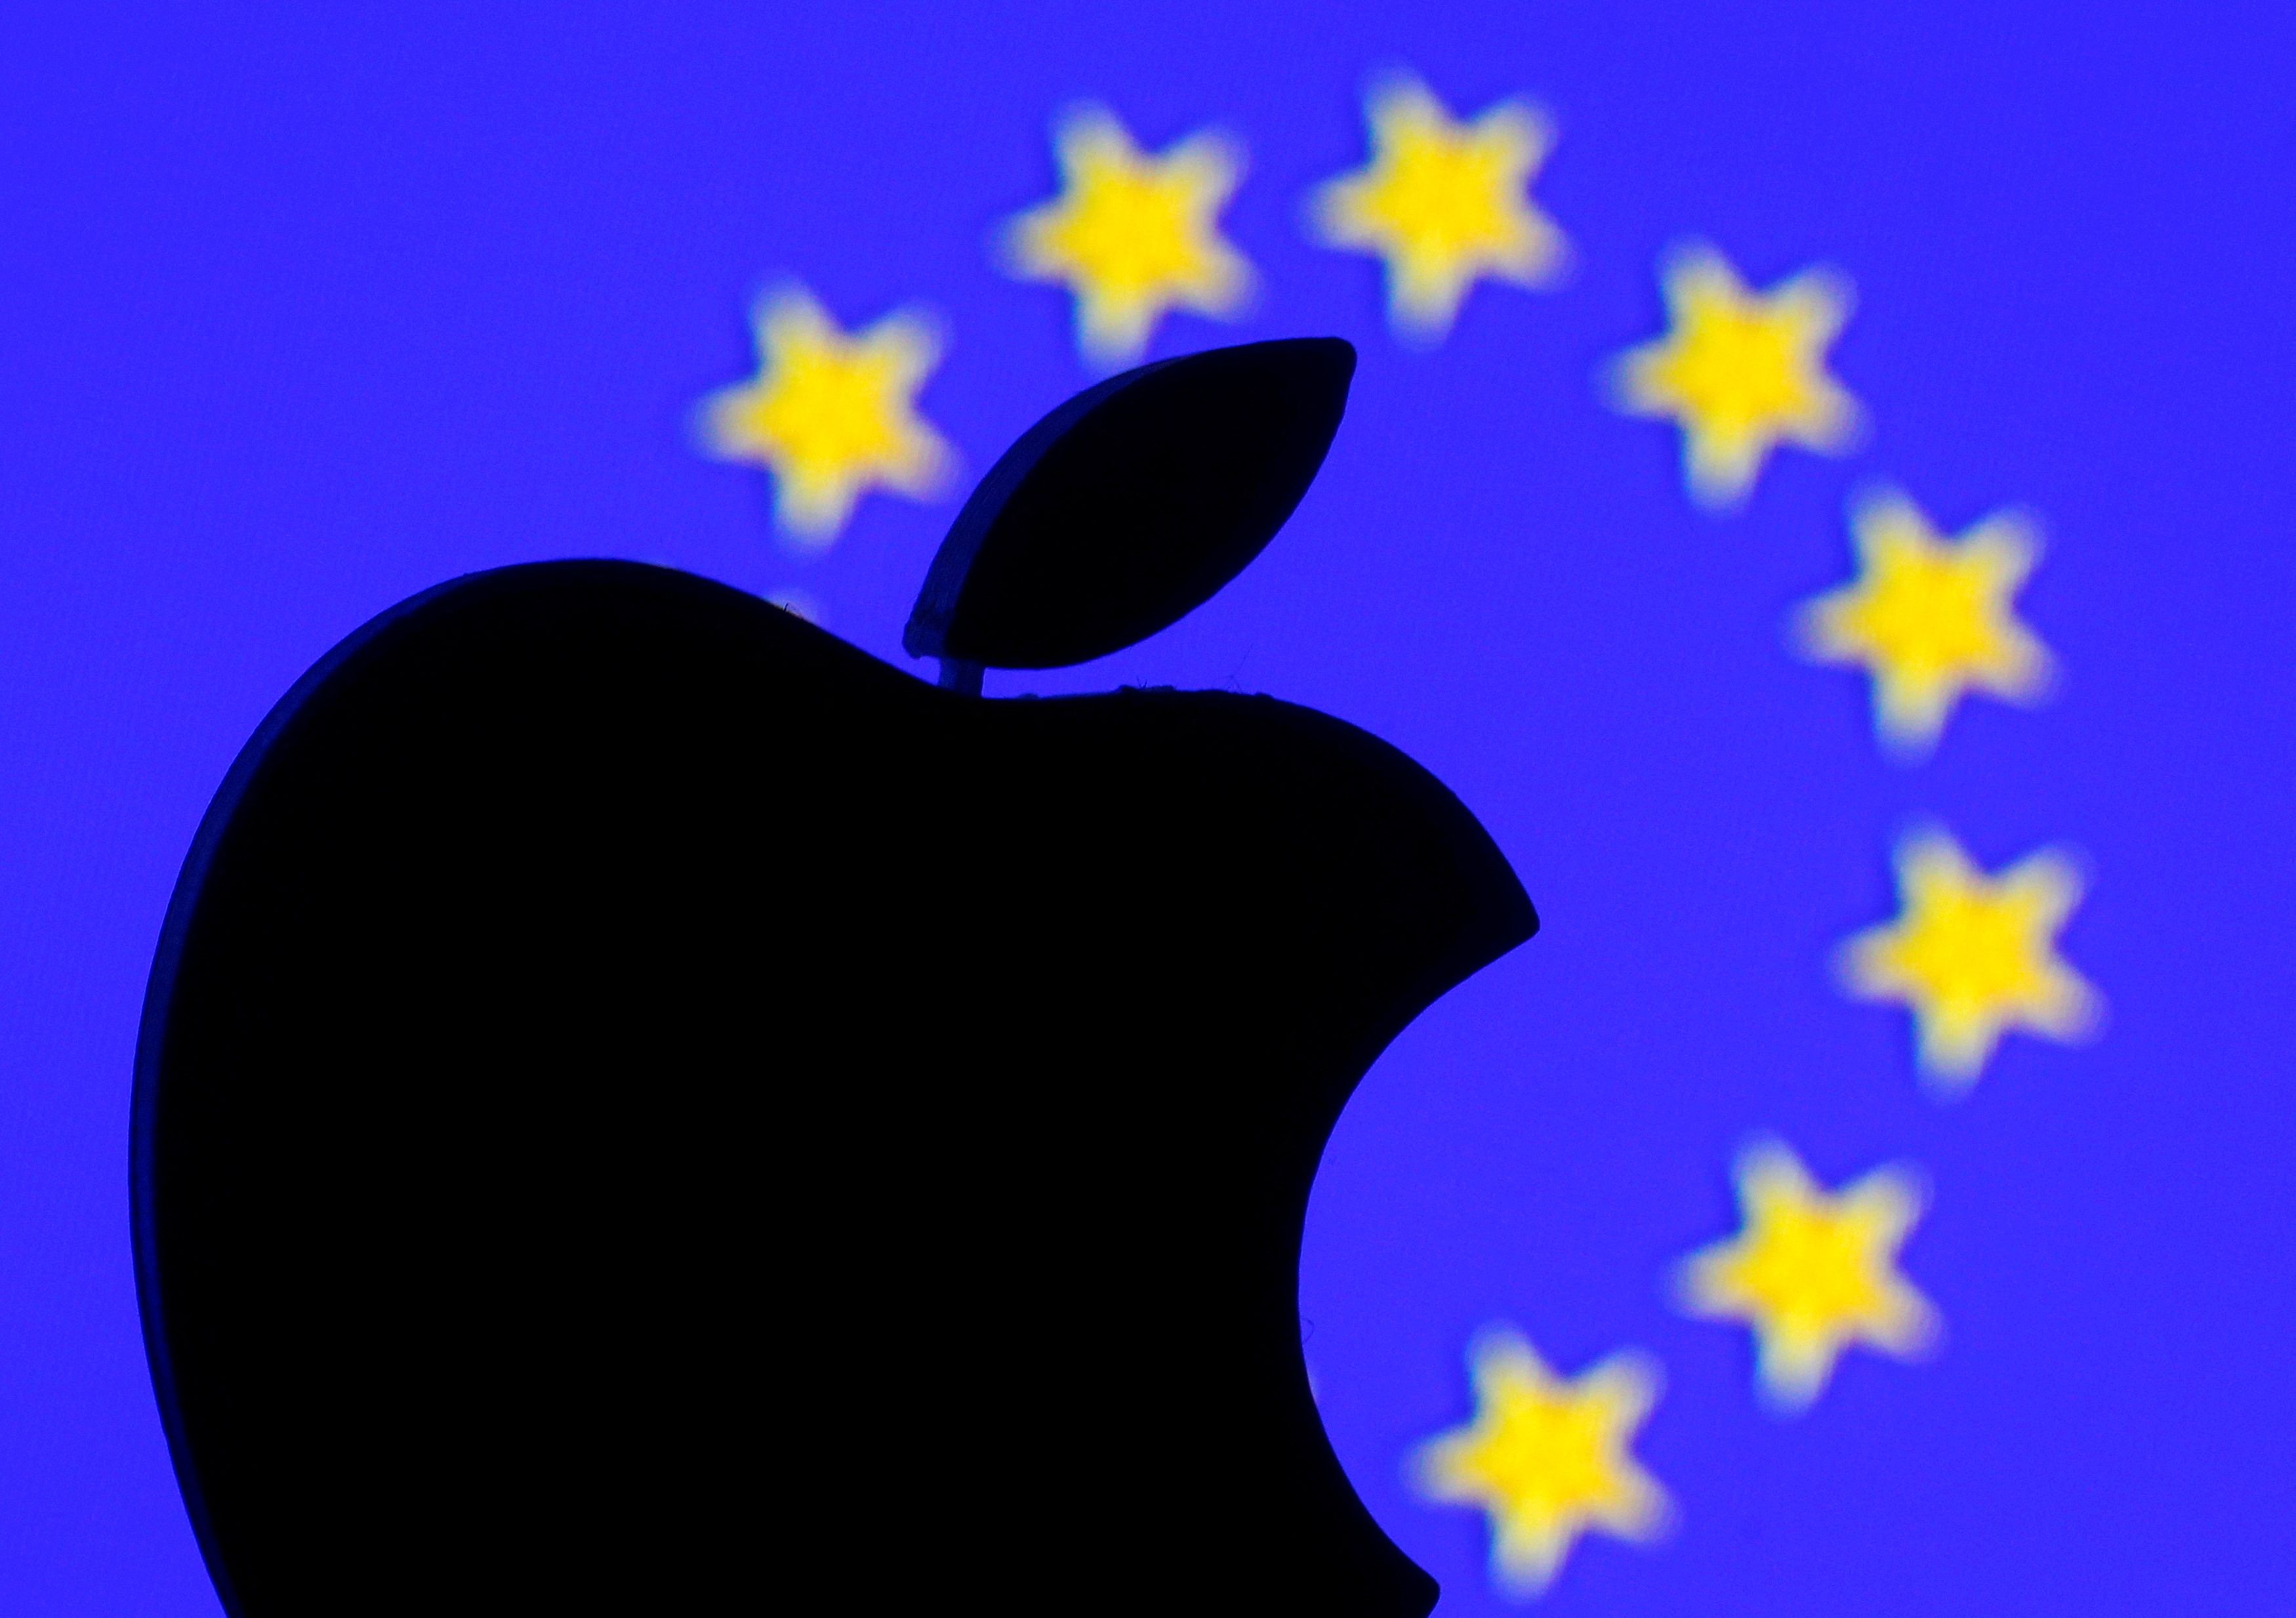 FILE PHOTO: A 3D-printed Apple logo is seen in front of a displayed European Union flag in this illustration